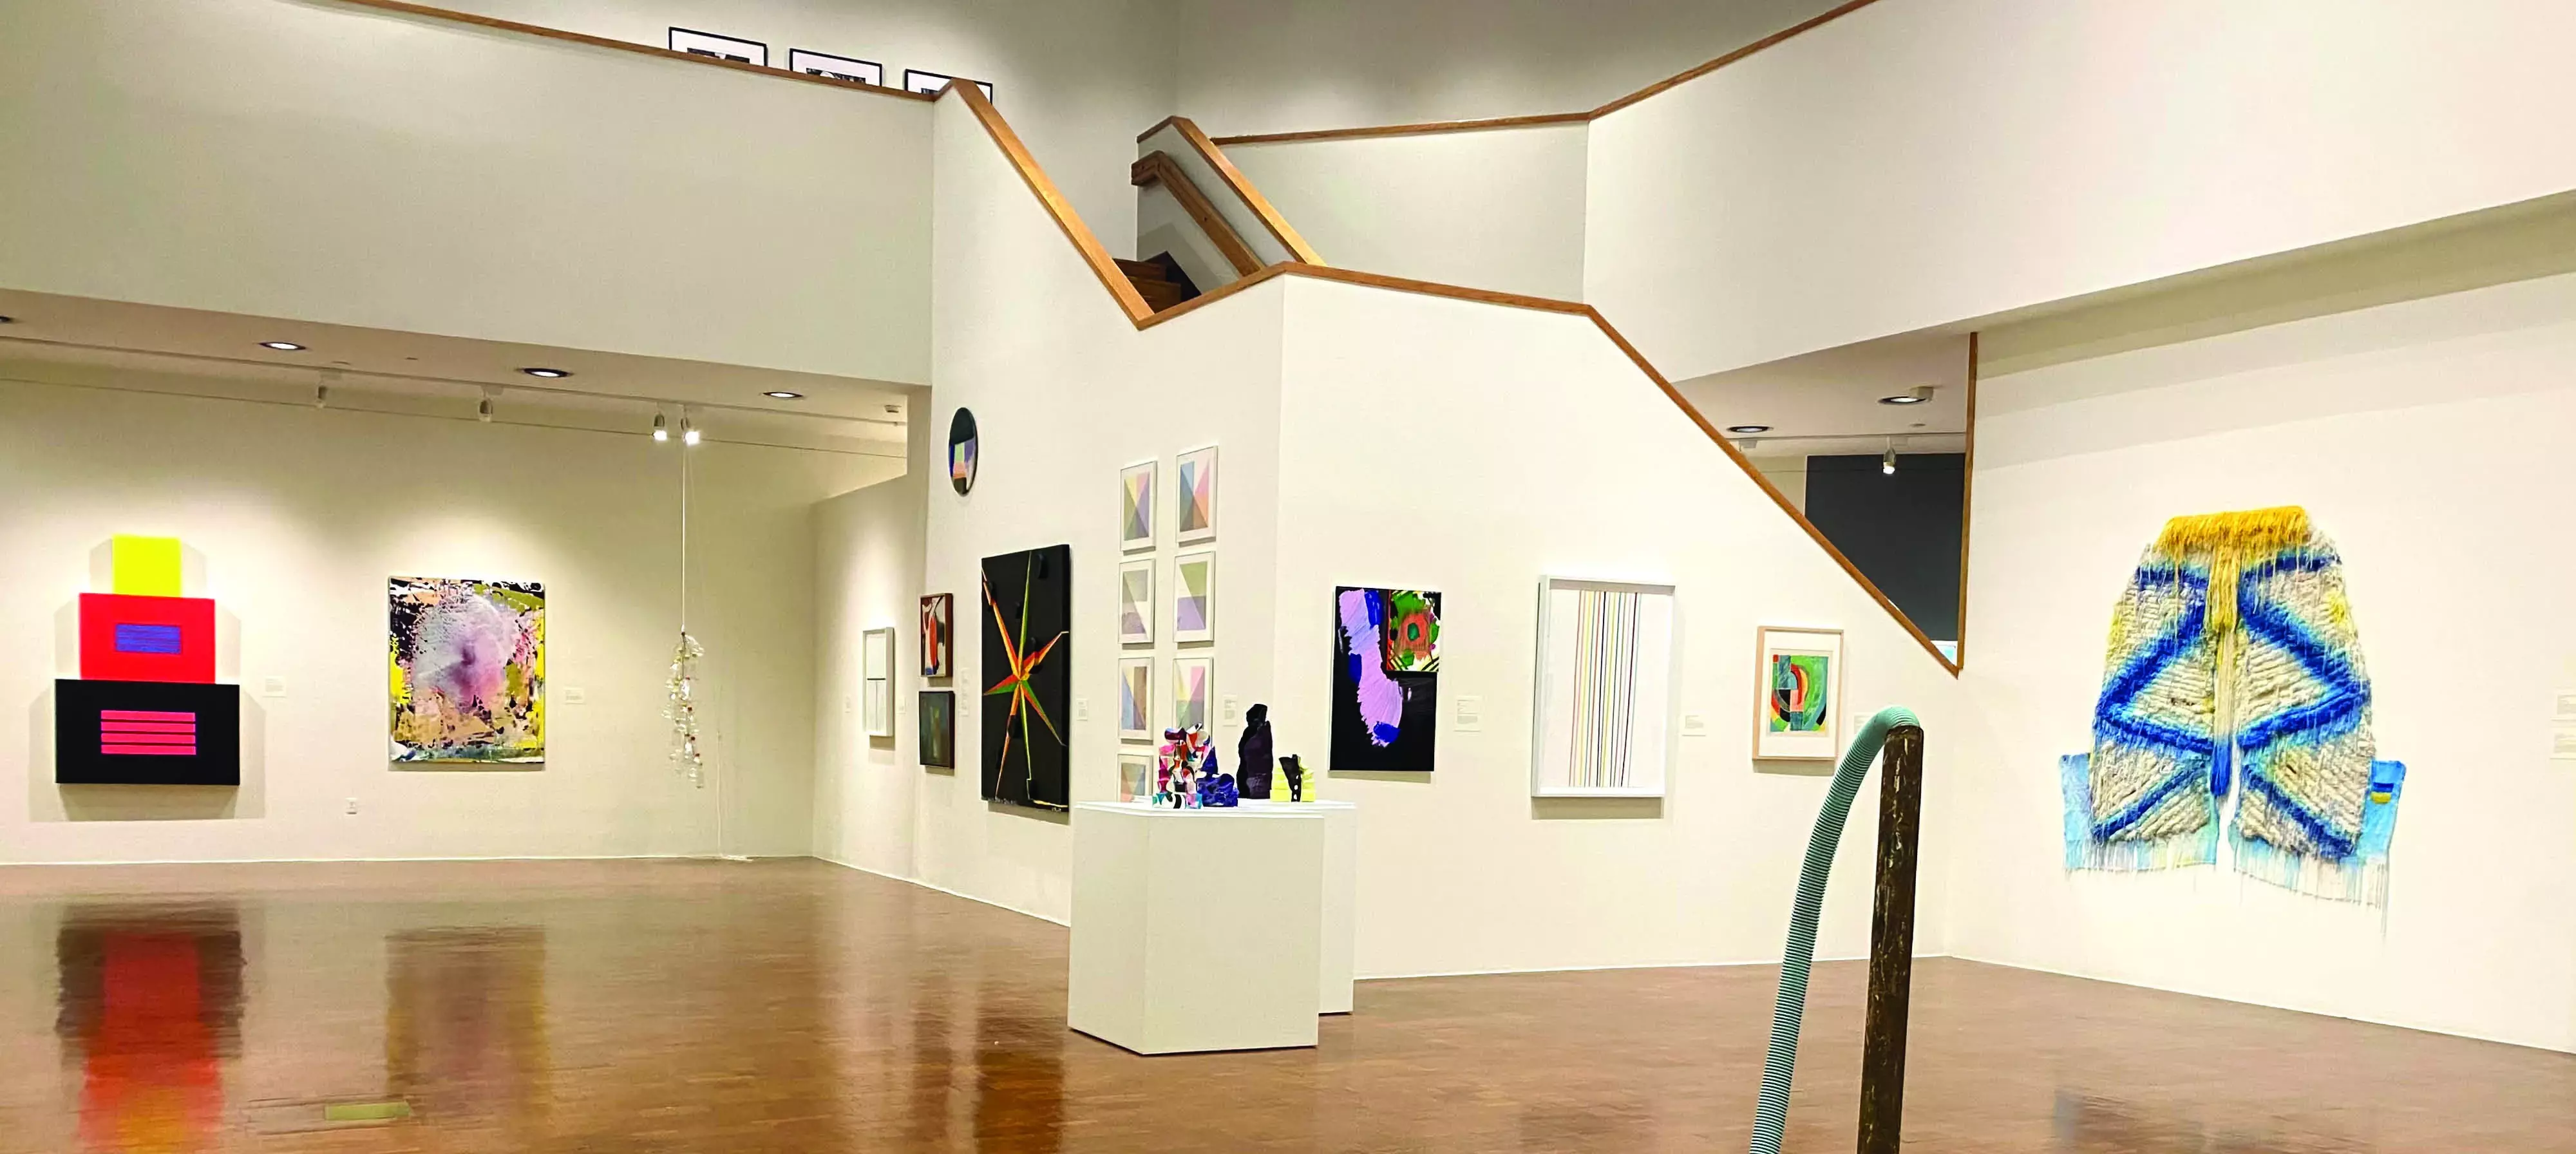 Art Museum interior with staircase leading to the second floor.